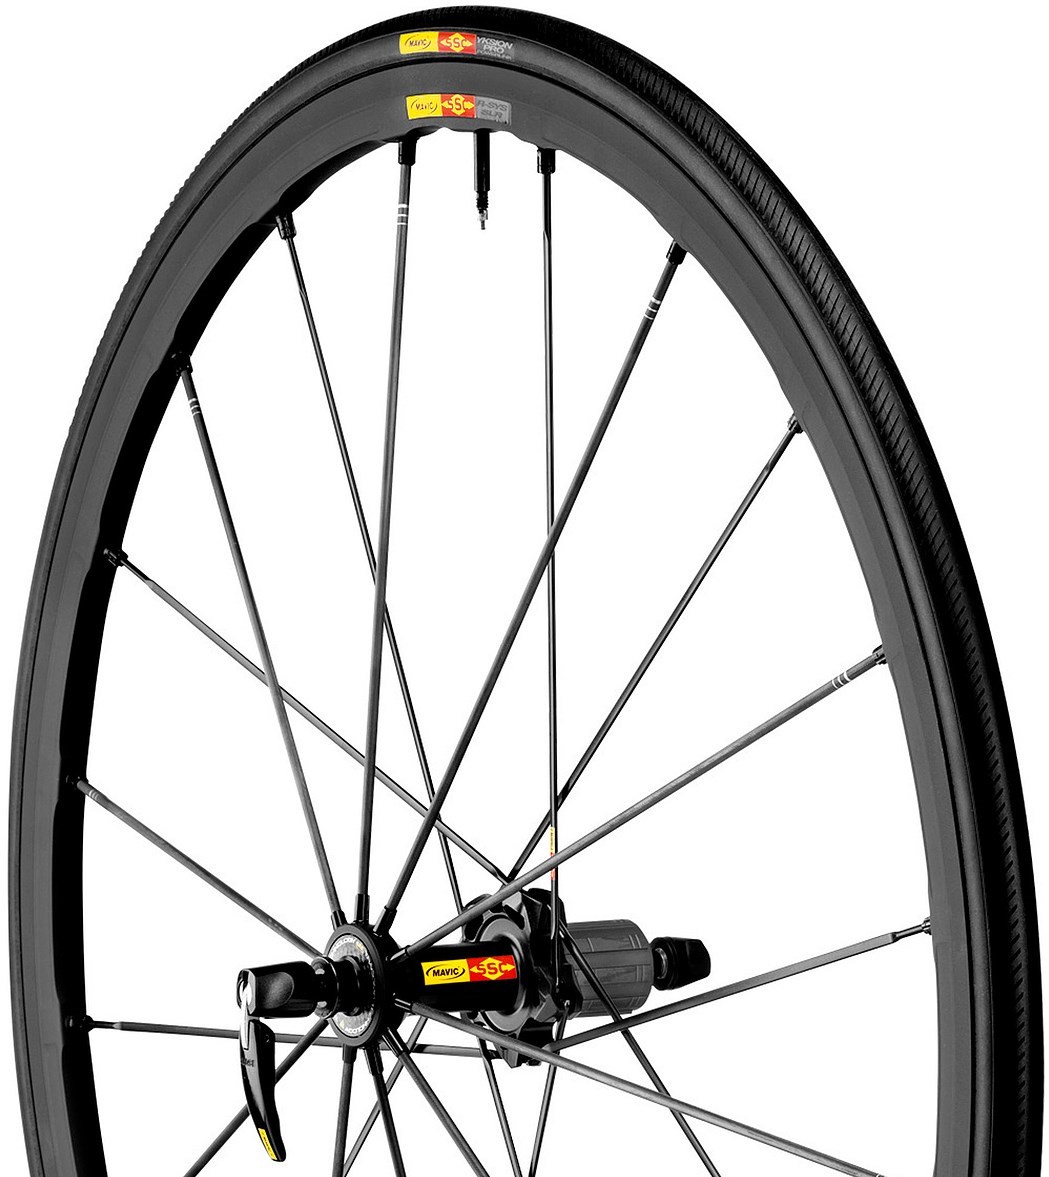 Mavic R-Sys SLR Tubular Road Wheel With Wheel-Tyre System product image